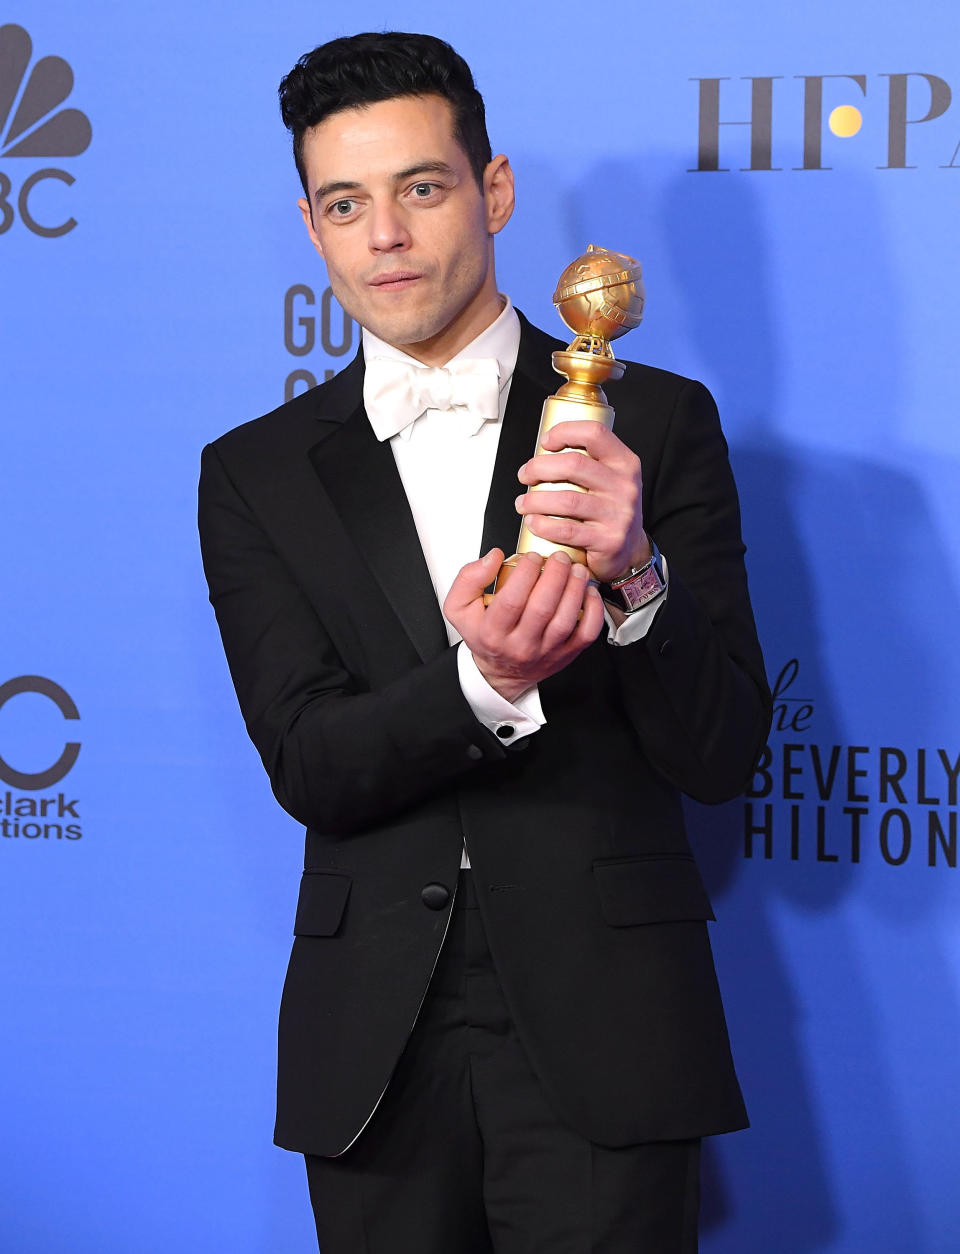 Malek won the Golden Globe for best performance by an actor in a drama film for &ldquo;Bohemian Rhapsody&rdquo; in January. (Photo: Steve Granitz via Getty Images)